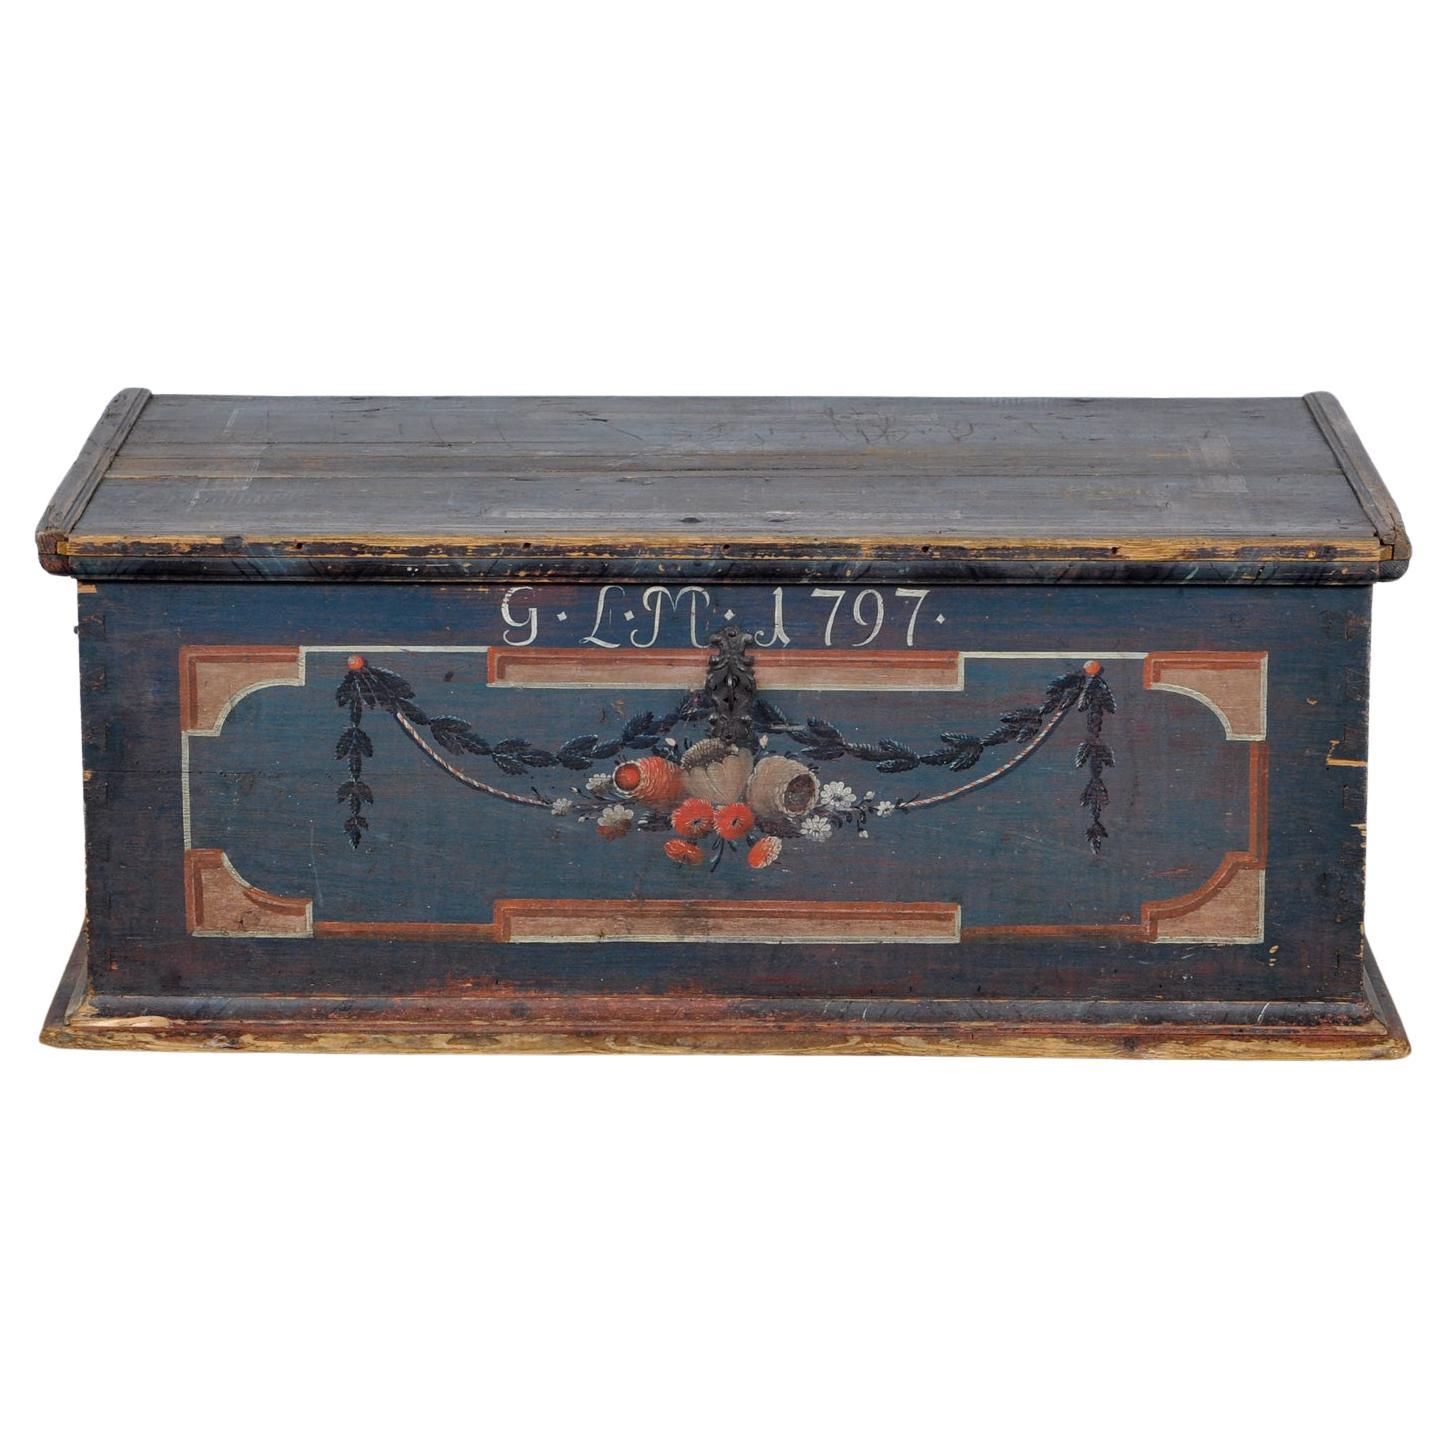 Wedding Chest From 1797 For Sale